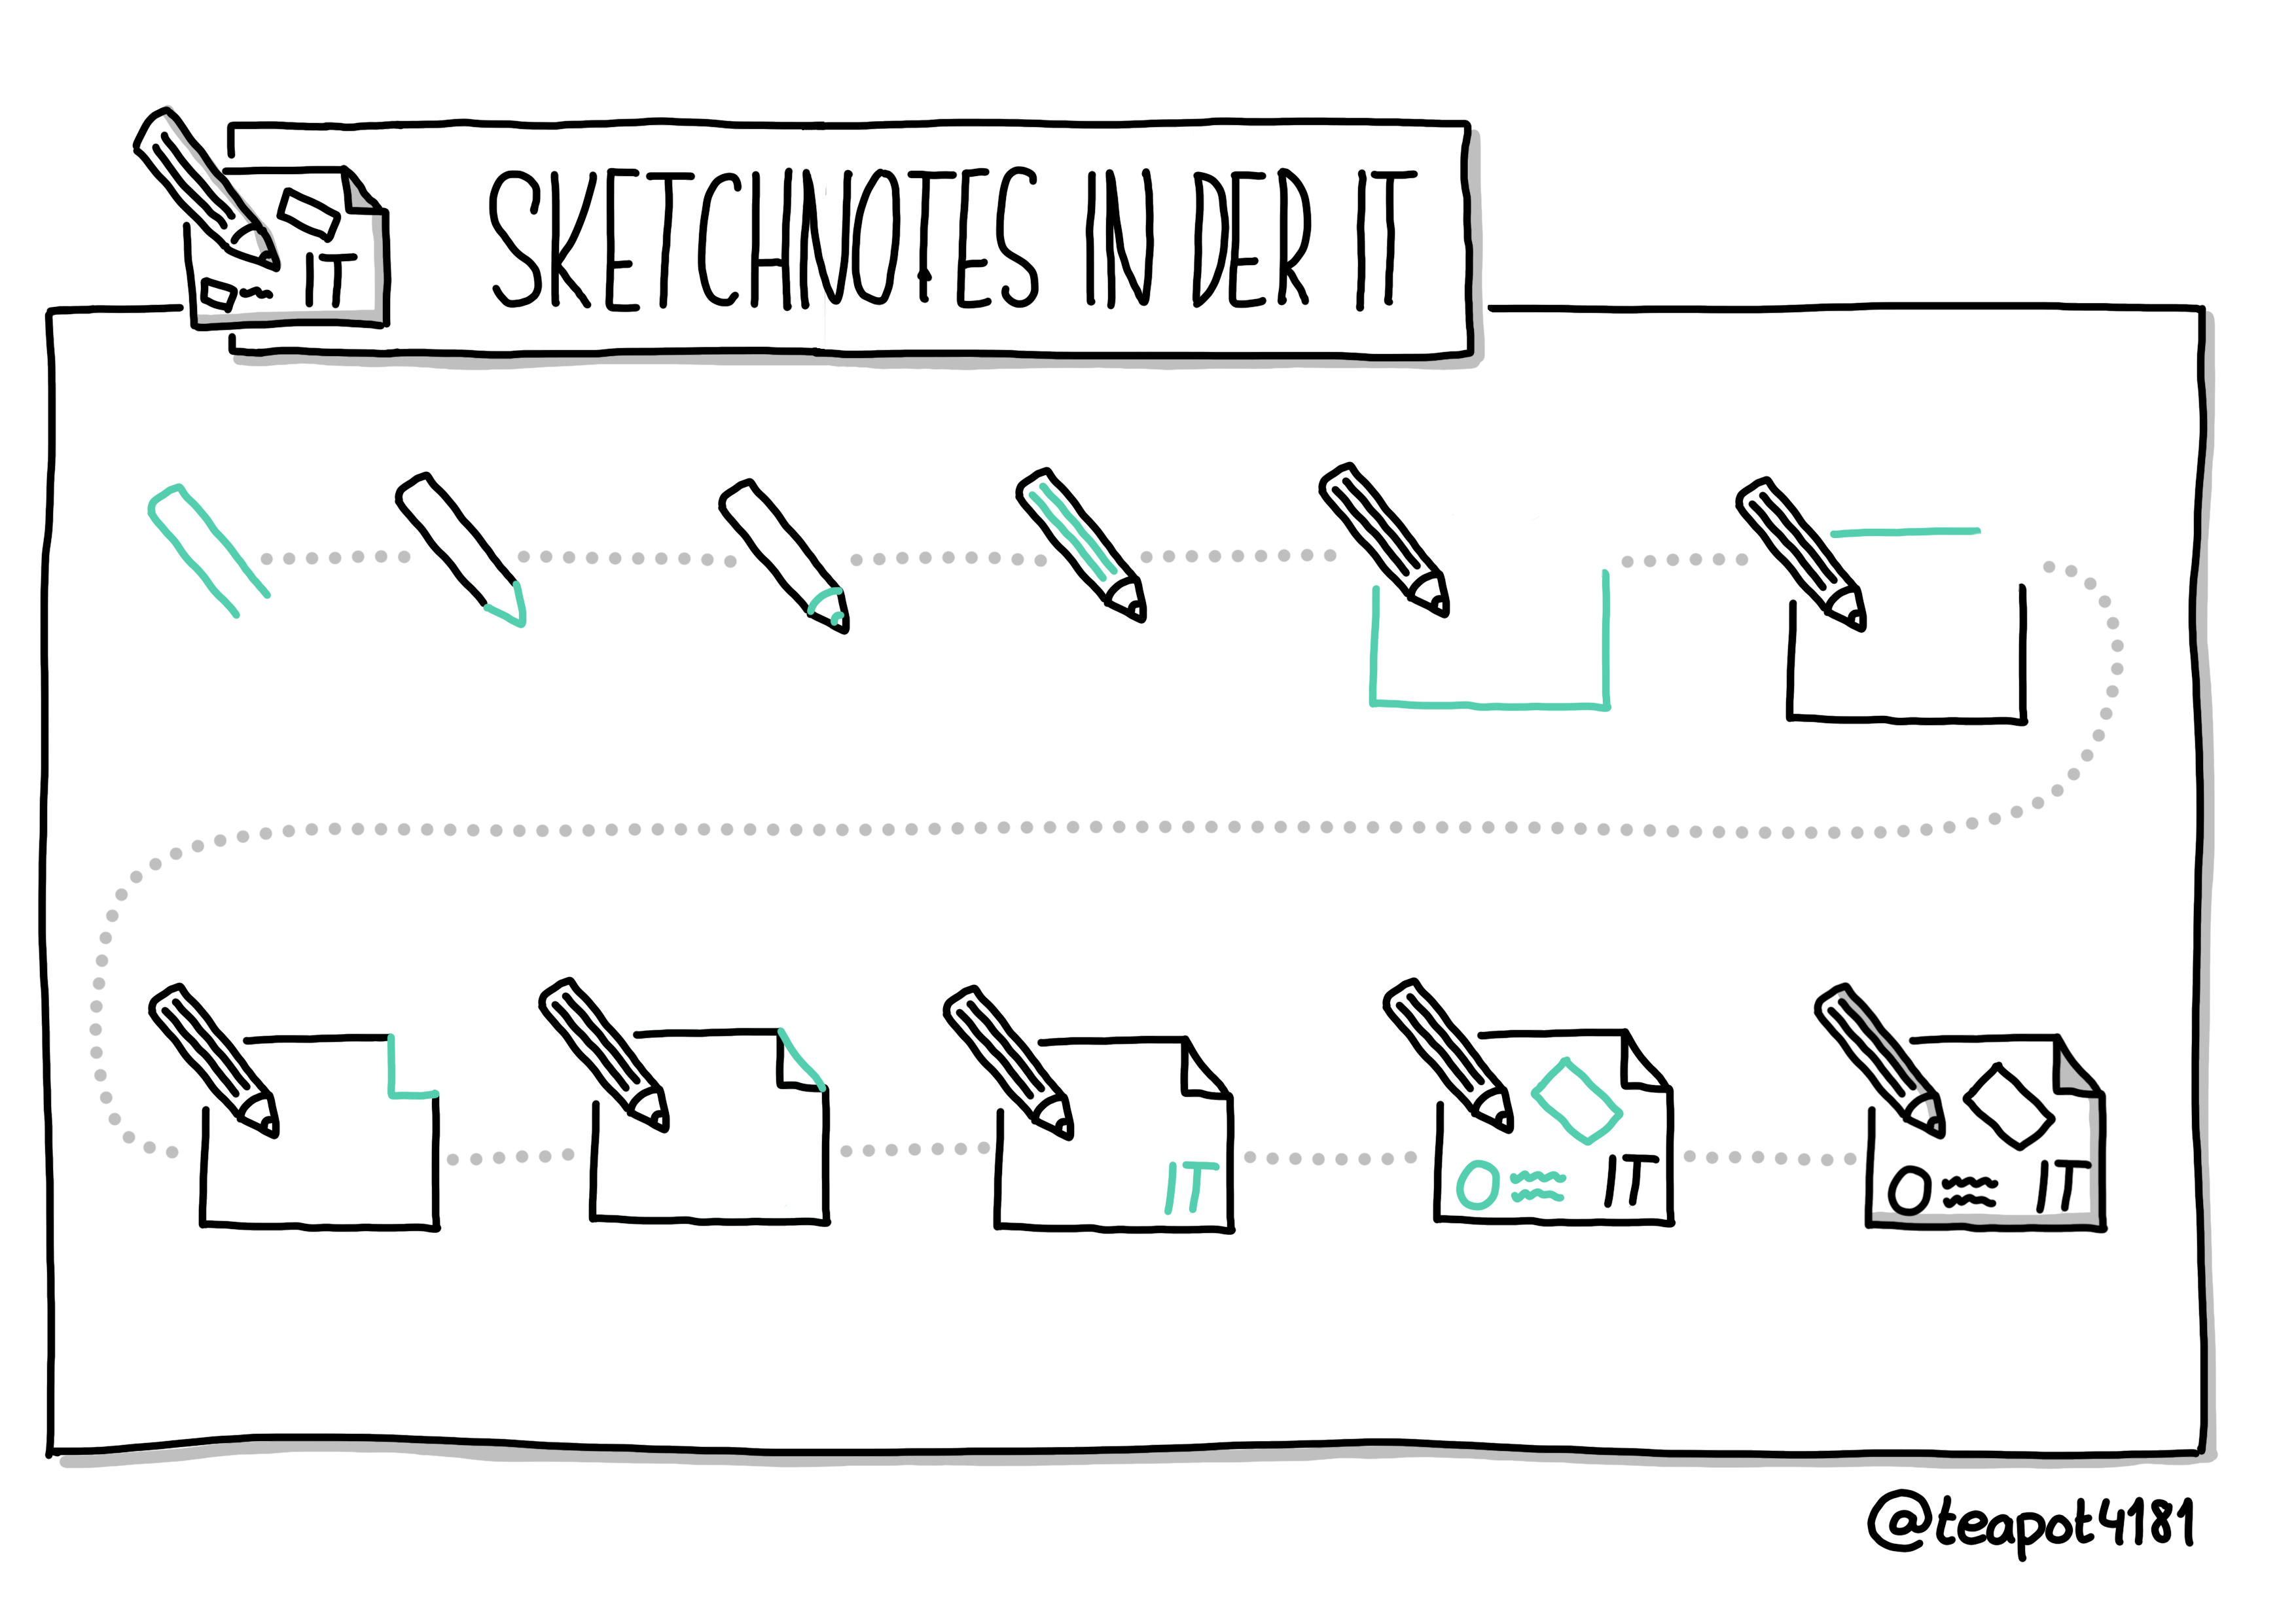 How to - Sketchnotes in der IT